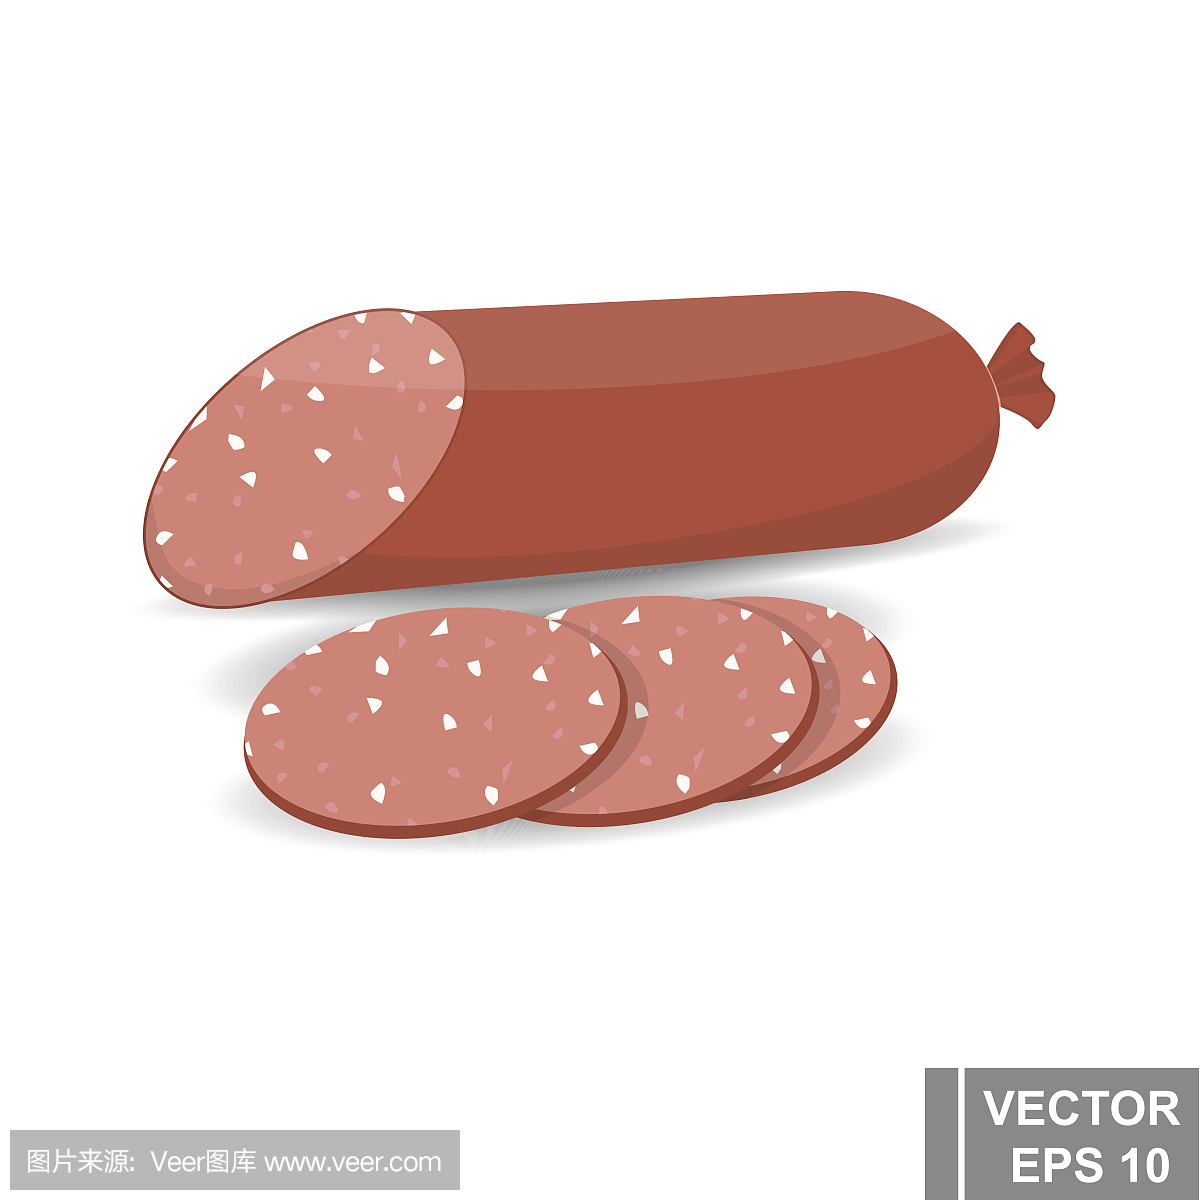 Sausage. Meat. Tasty food. The icon. For your 